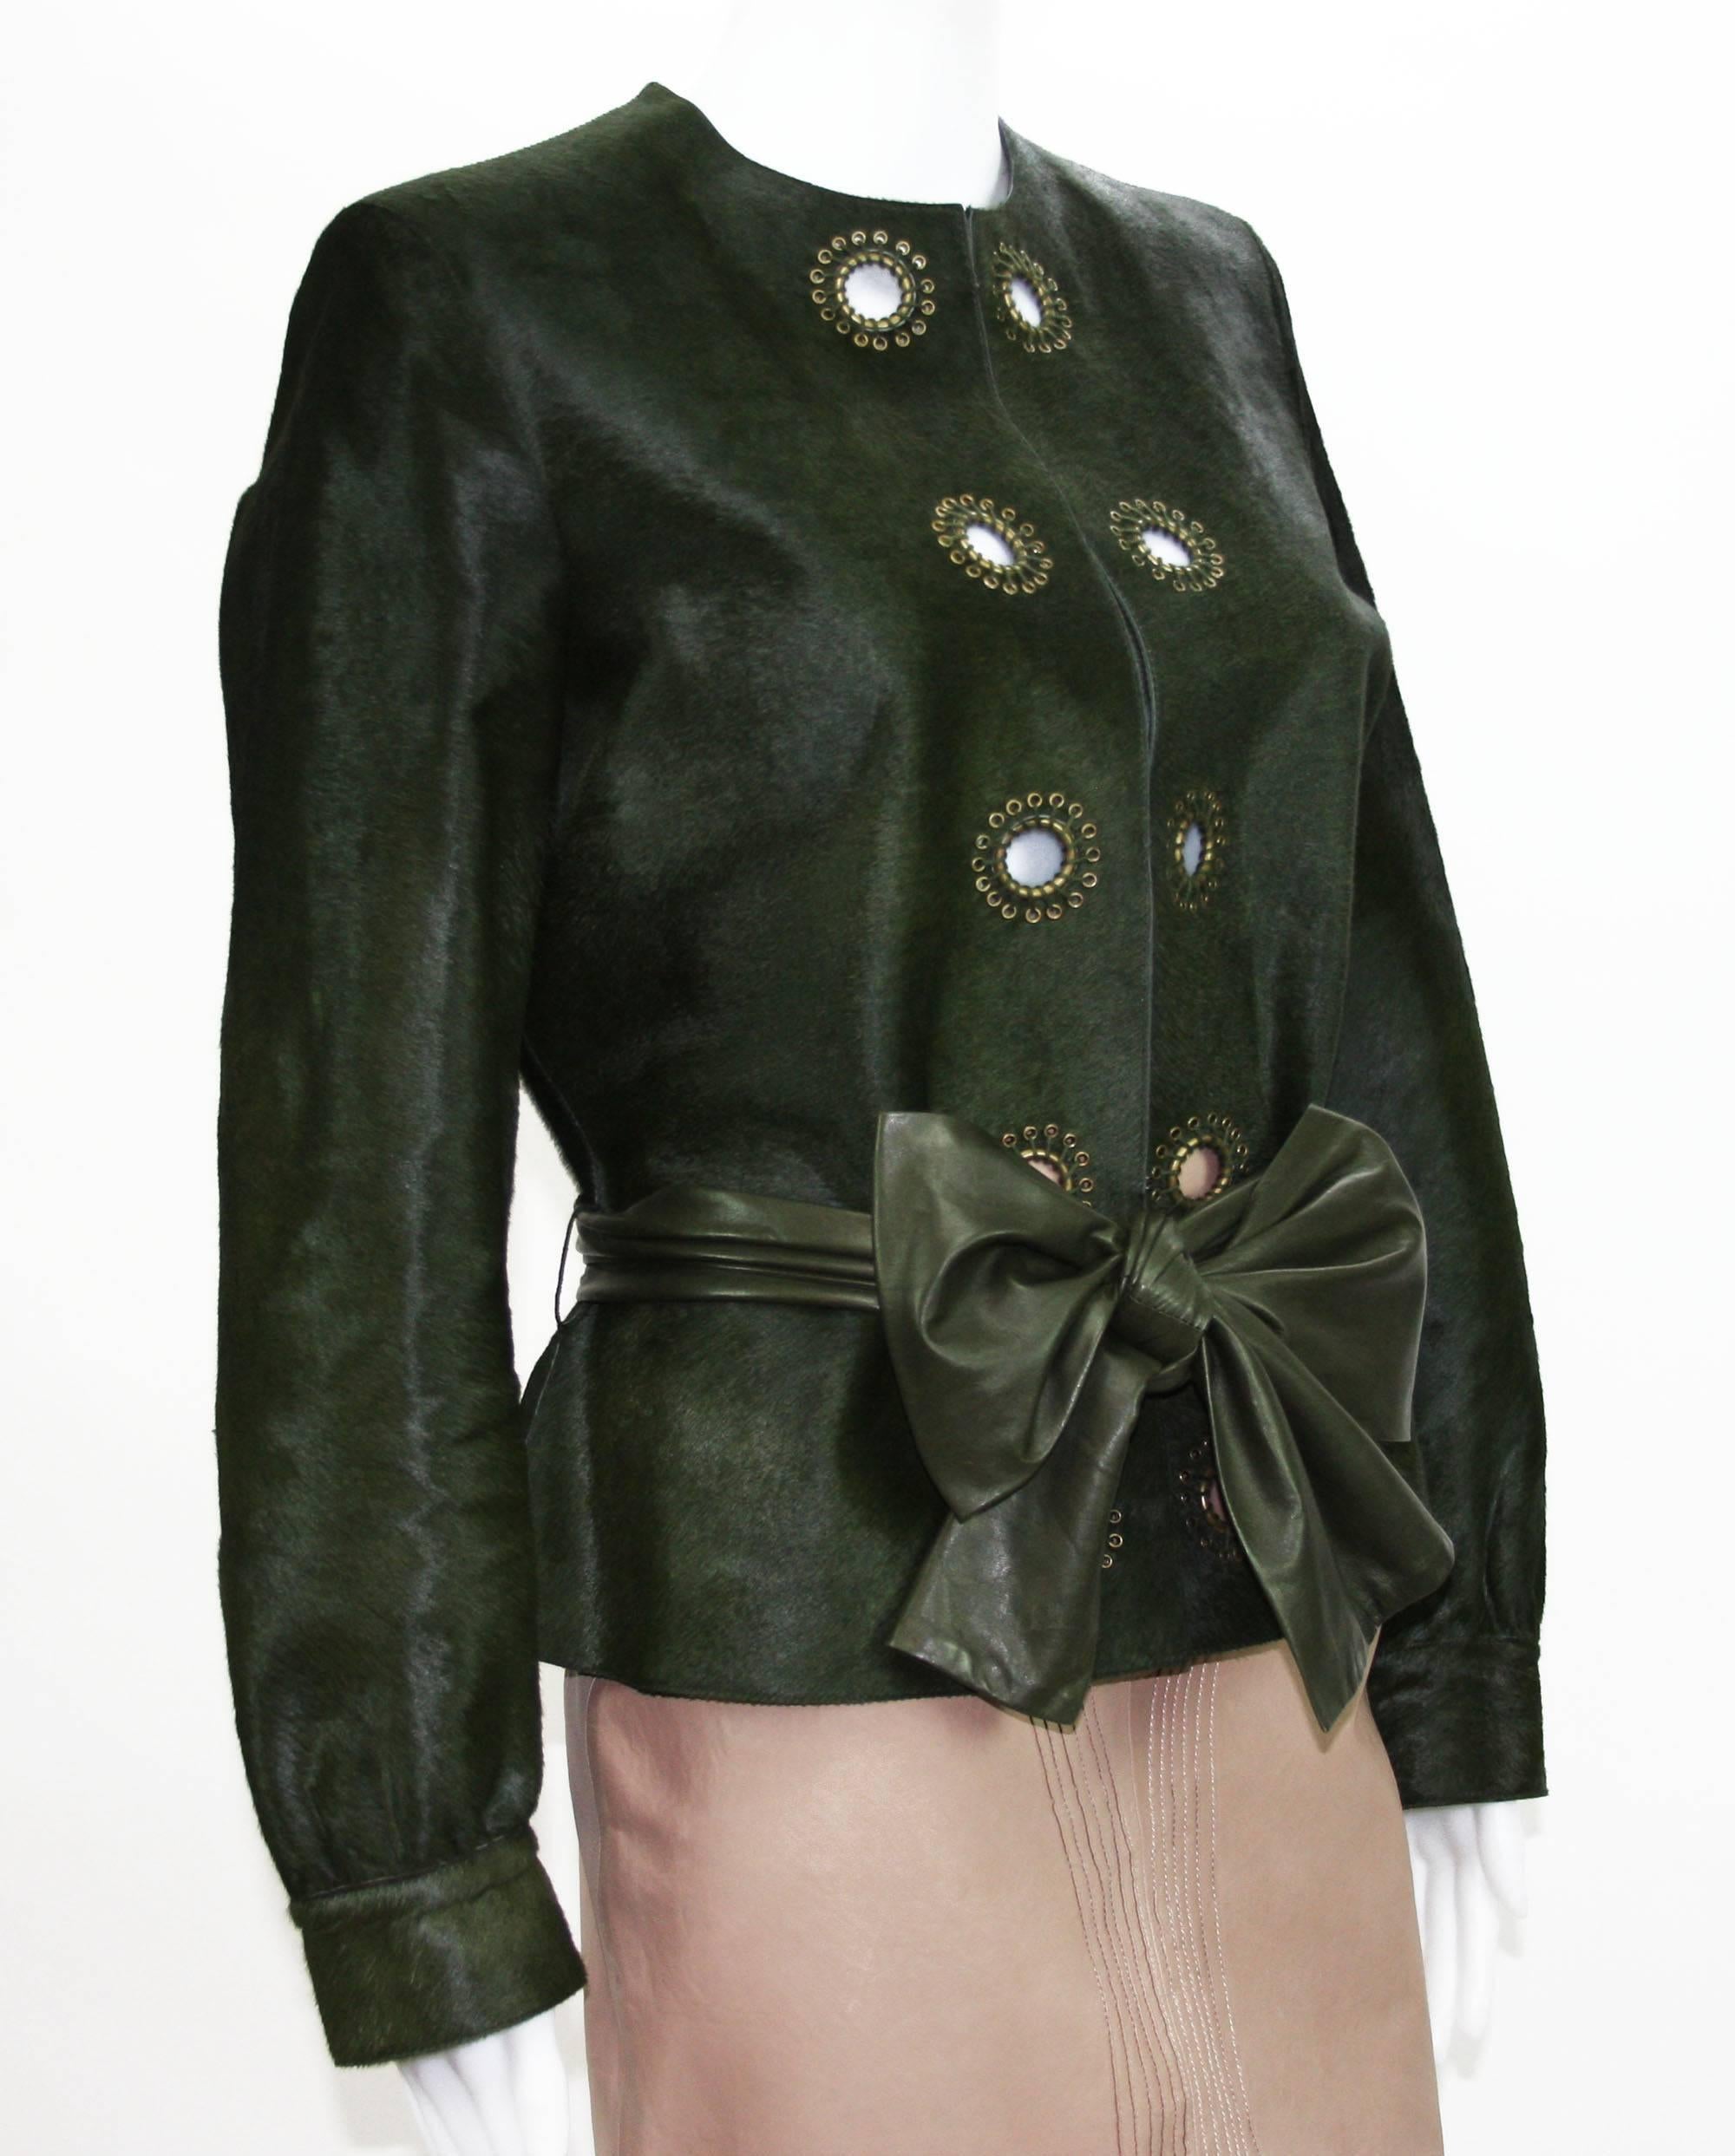 Yves Saint Laurent Leather Jacket.
Fr. size 44
100% Calf Hair.
Color - Green.
Brass-Tone Eyelet Accents Around.
Hook Closures.
Sash Tie Leather Belt.
Measurements Flat: Length - 24 inches, Sleeve - 24.5